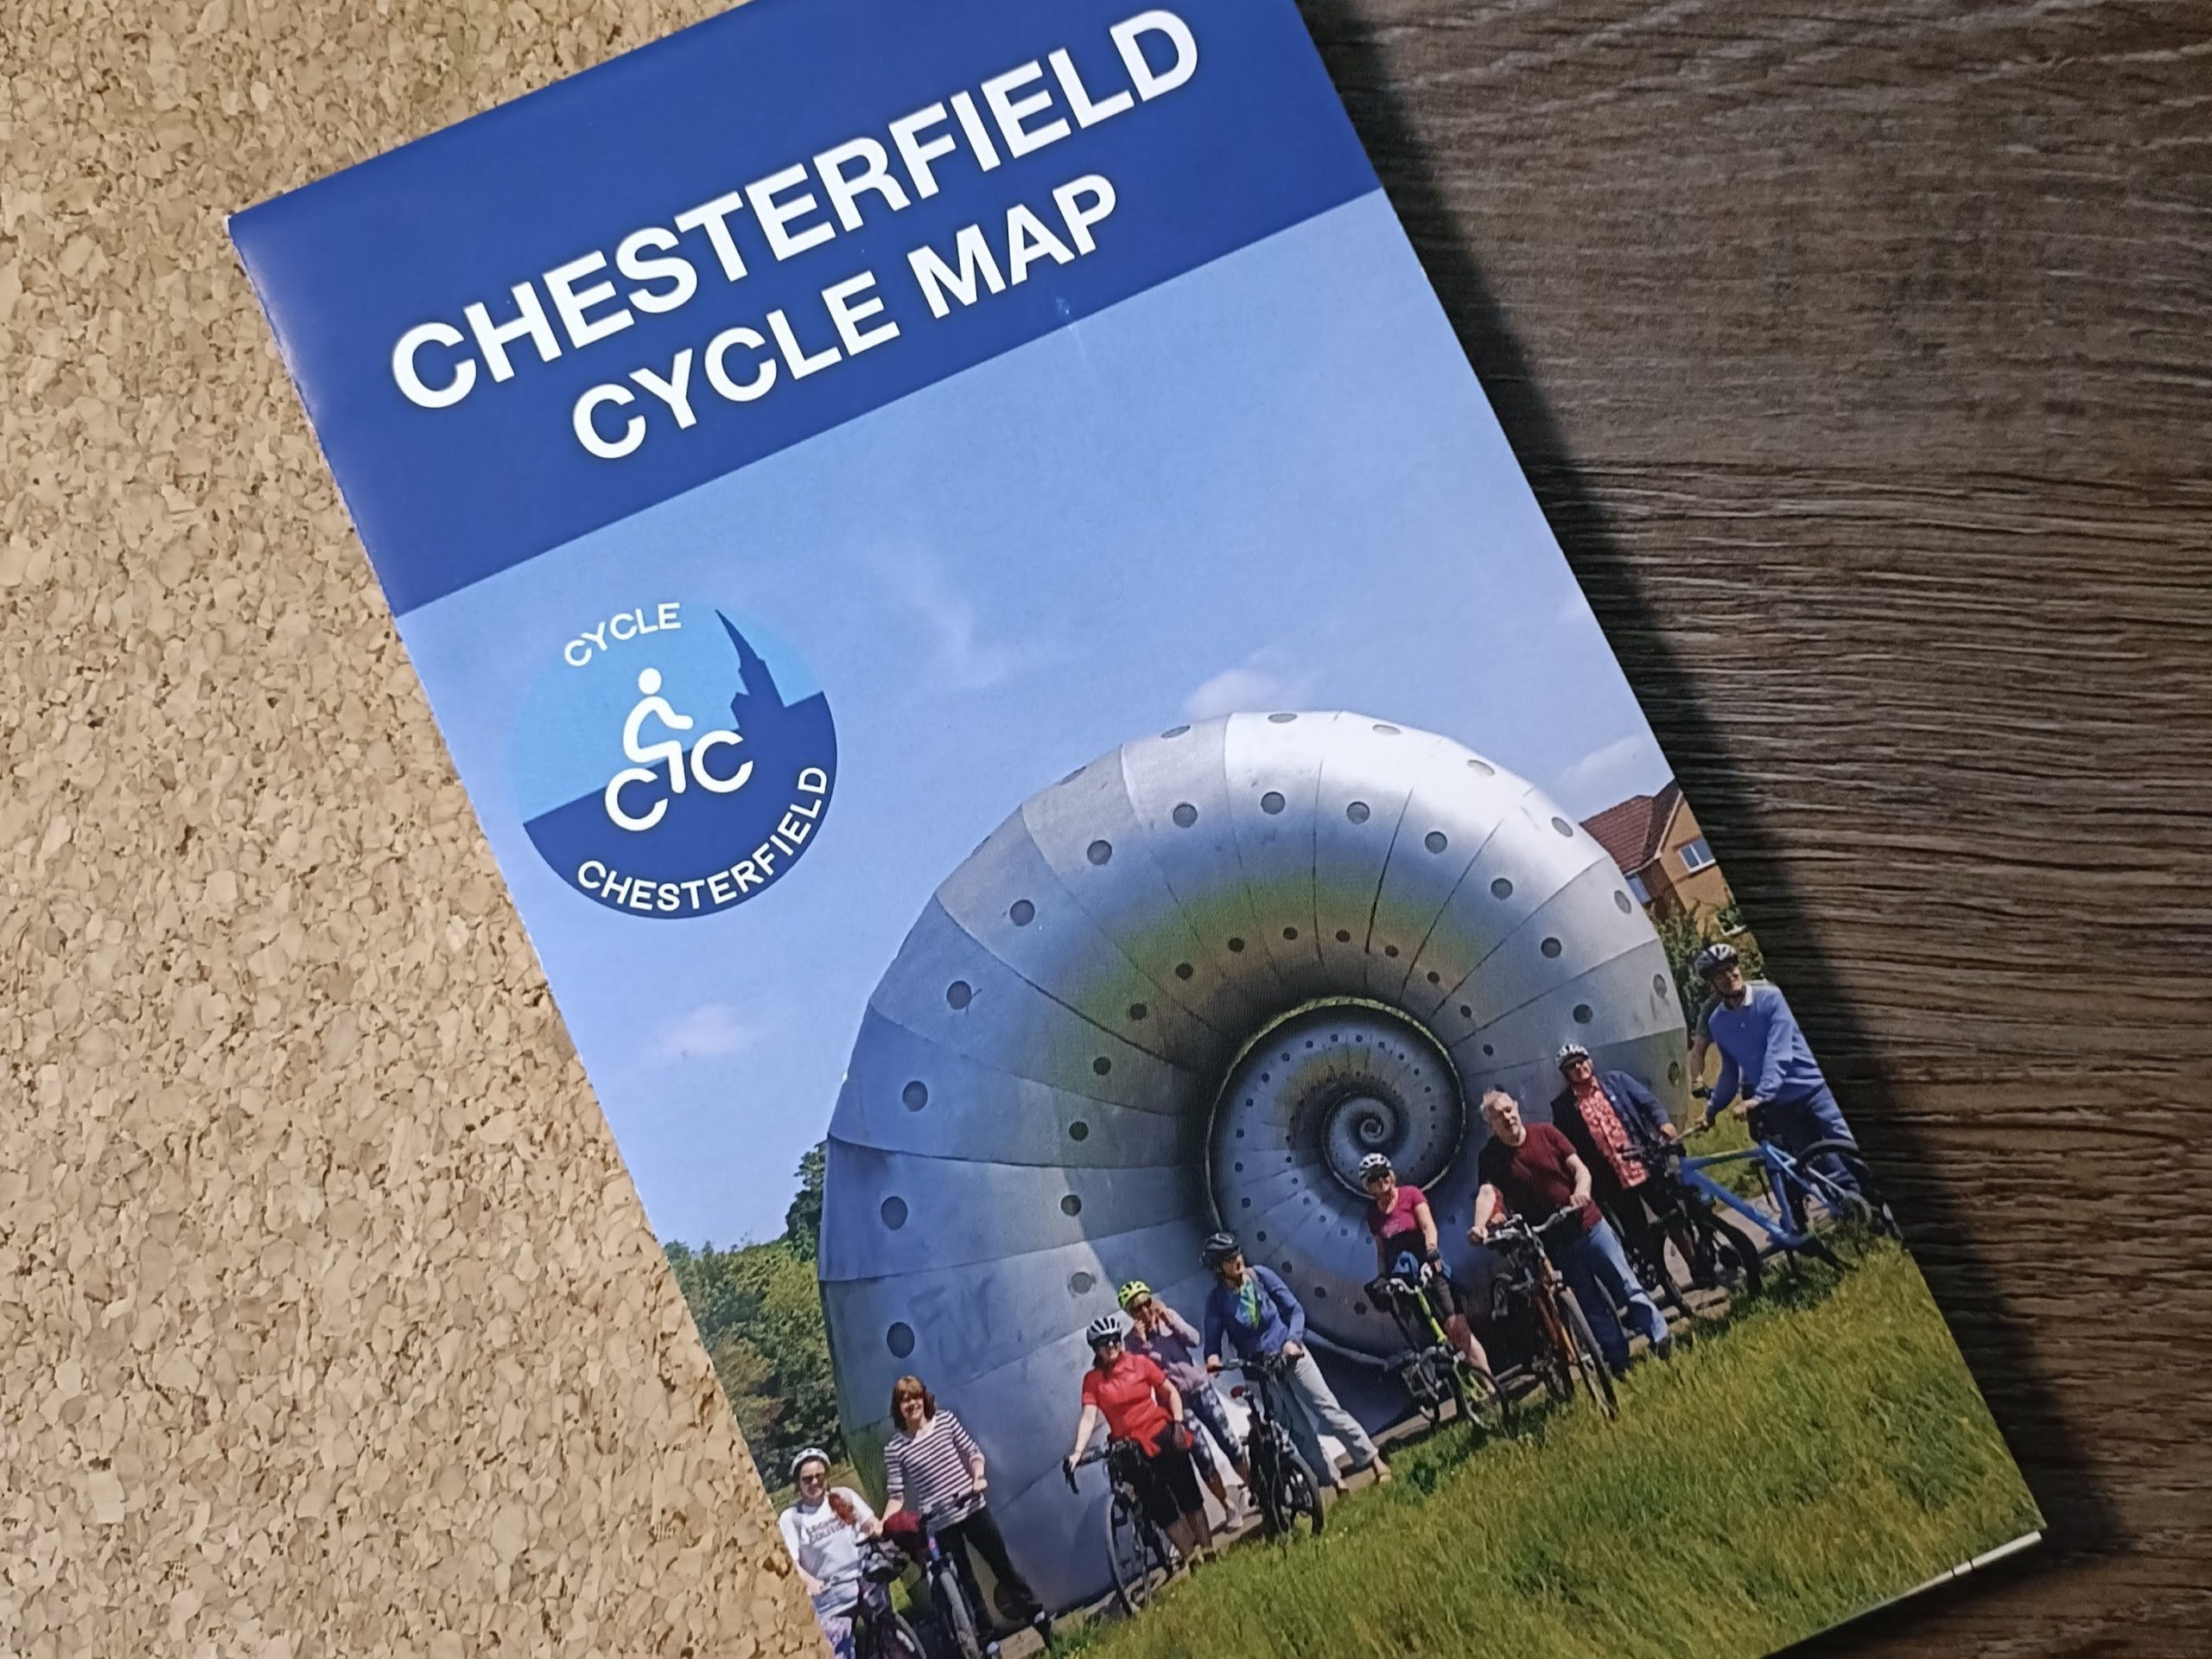 New Chesterfield Cycle Map Available!